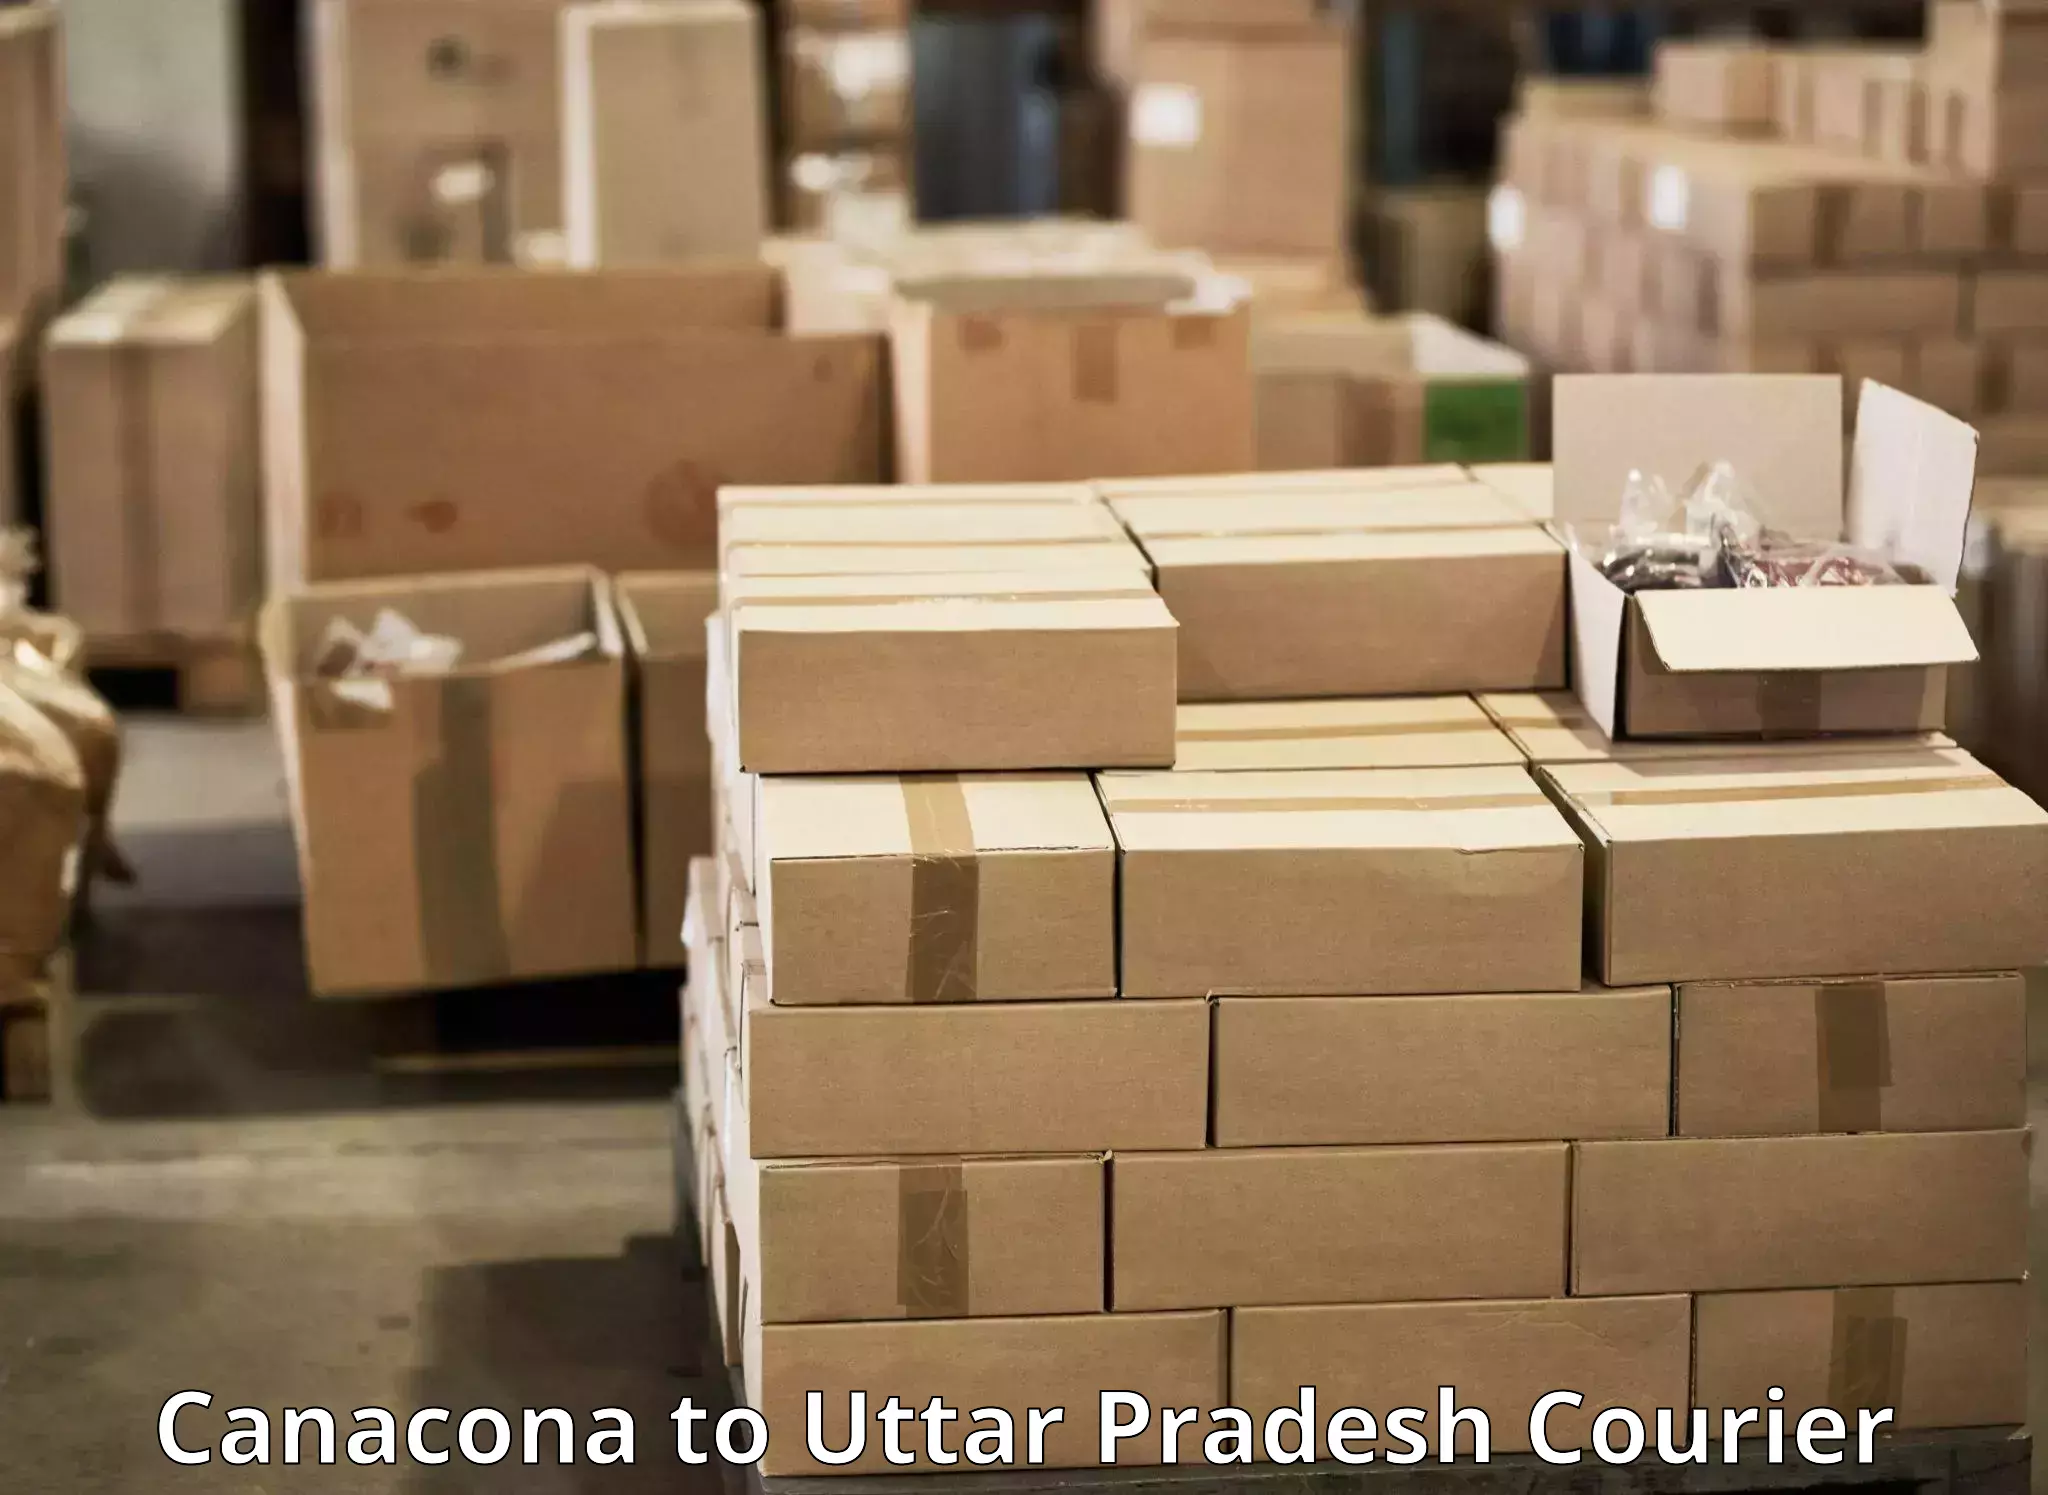 Quick parcel dispatch in Canacona to Bhadohi